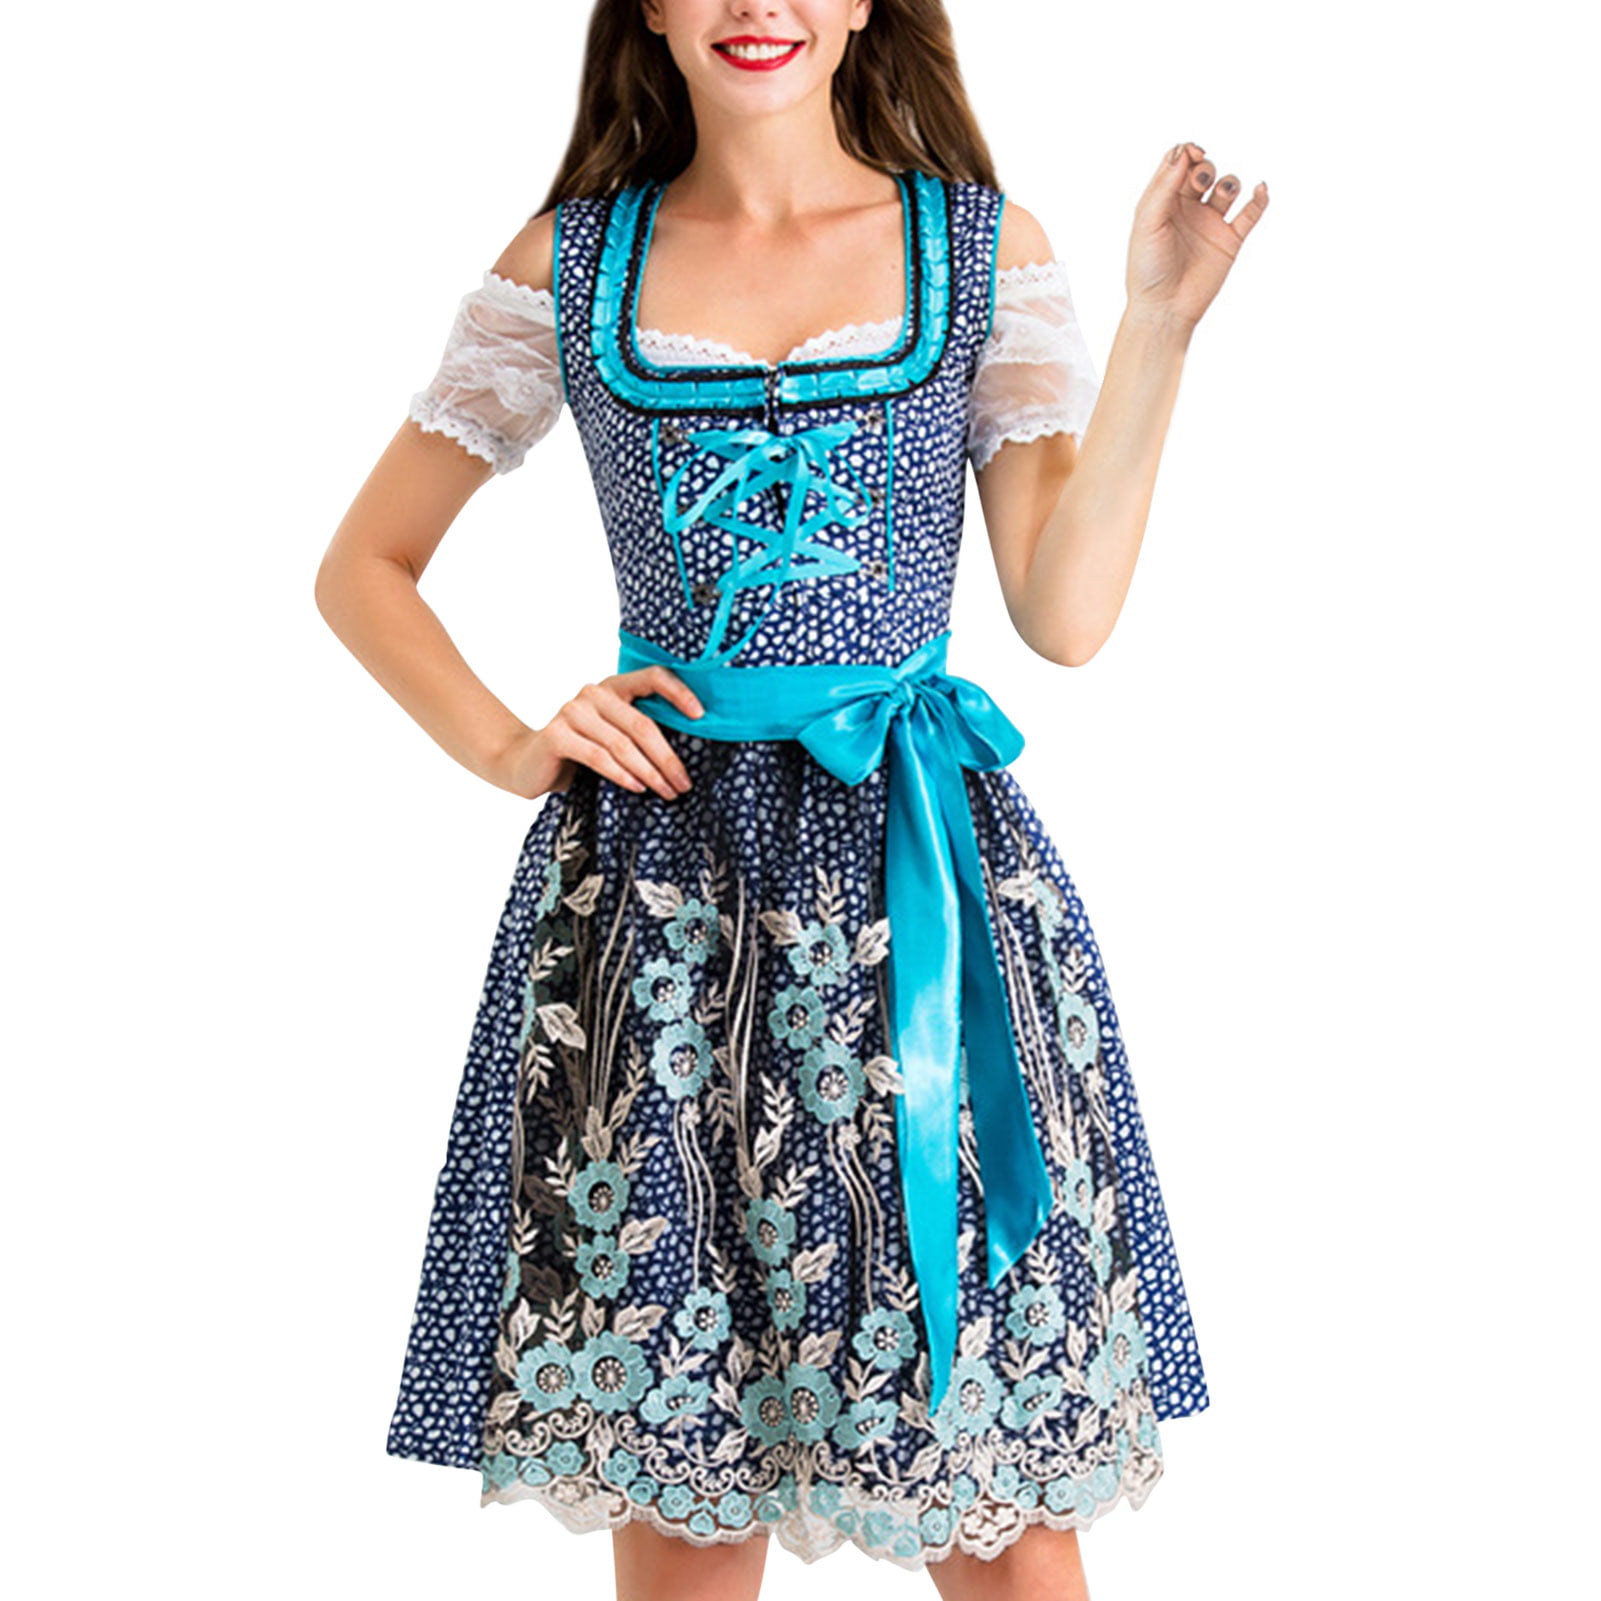 Tostmann Dirndl turquoise-black classic style Fashion Traditional Dresses Dirndl 